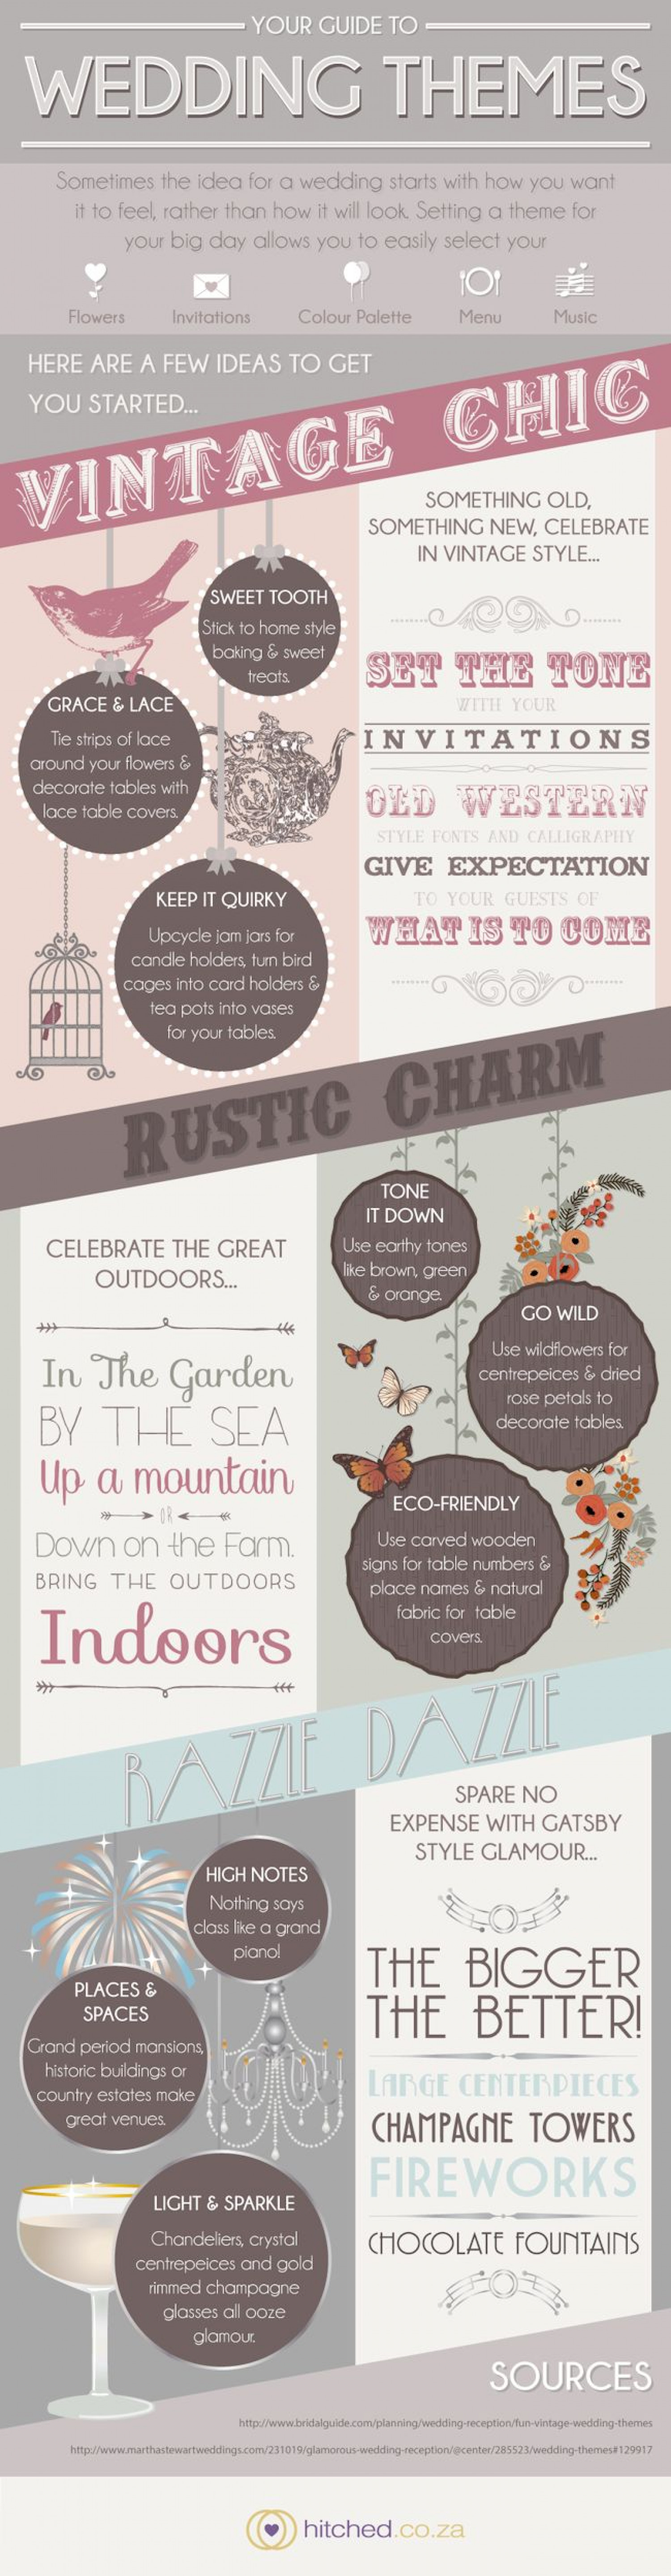 Your Guide To Wedding Themes Infographic